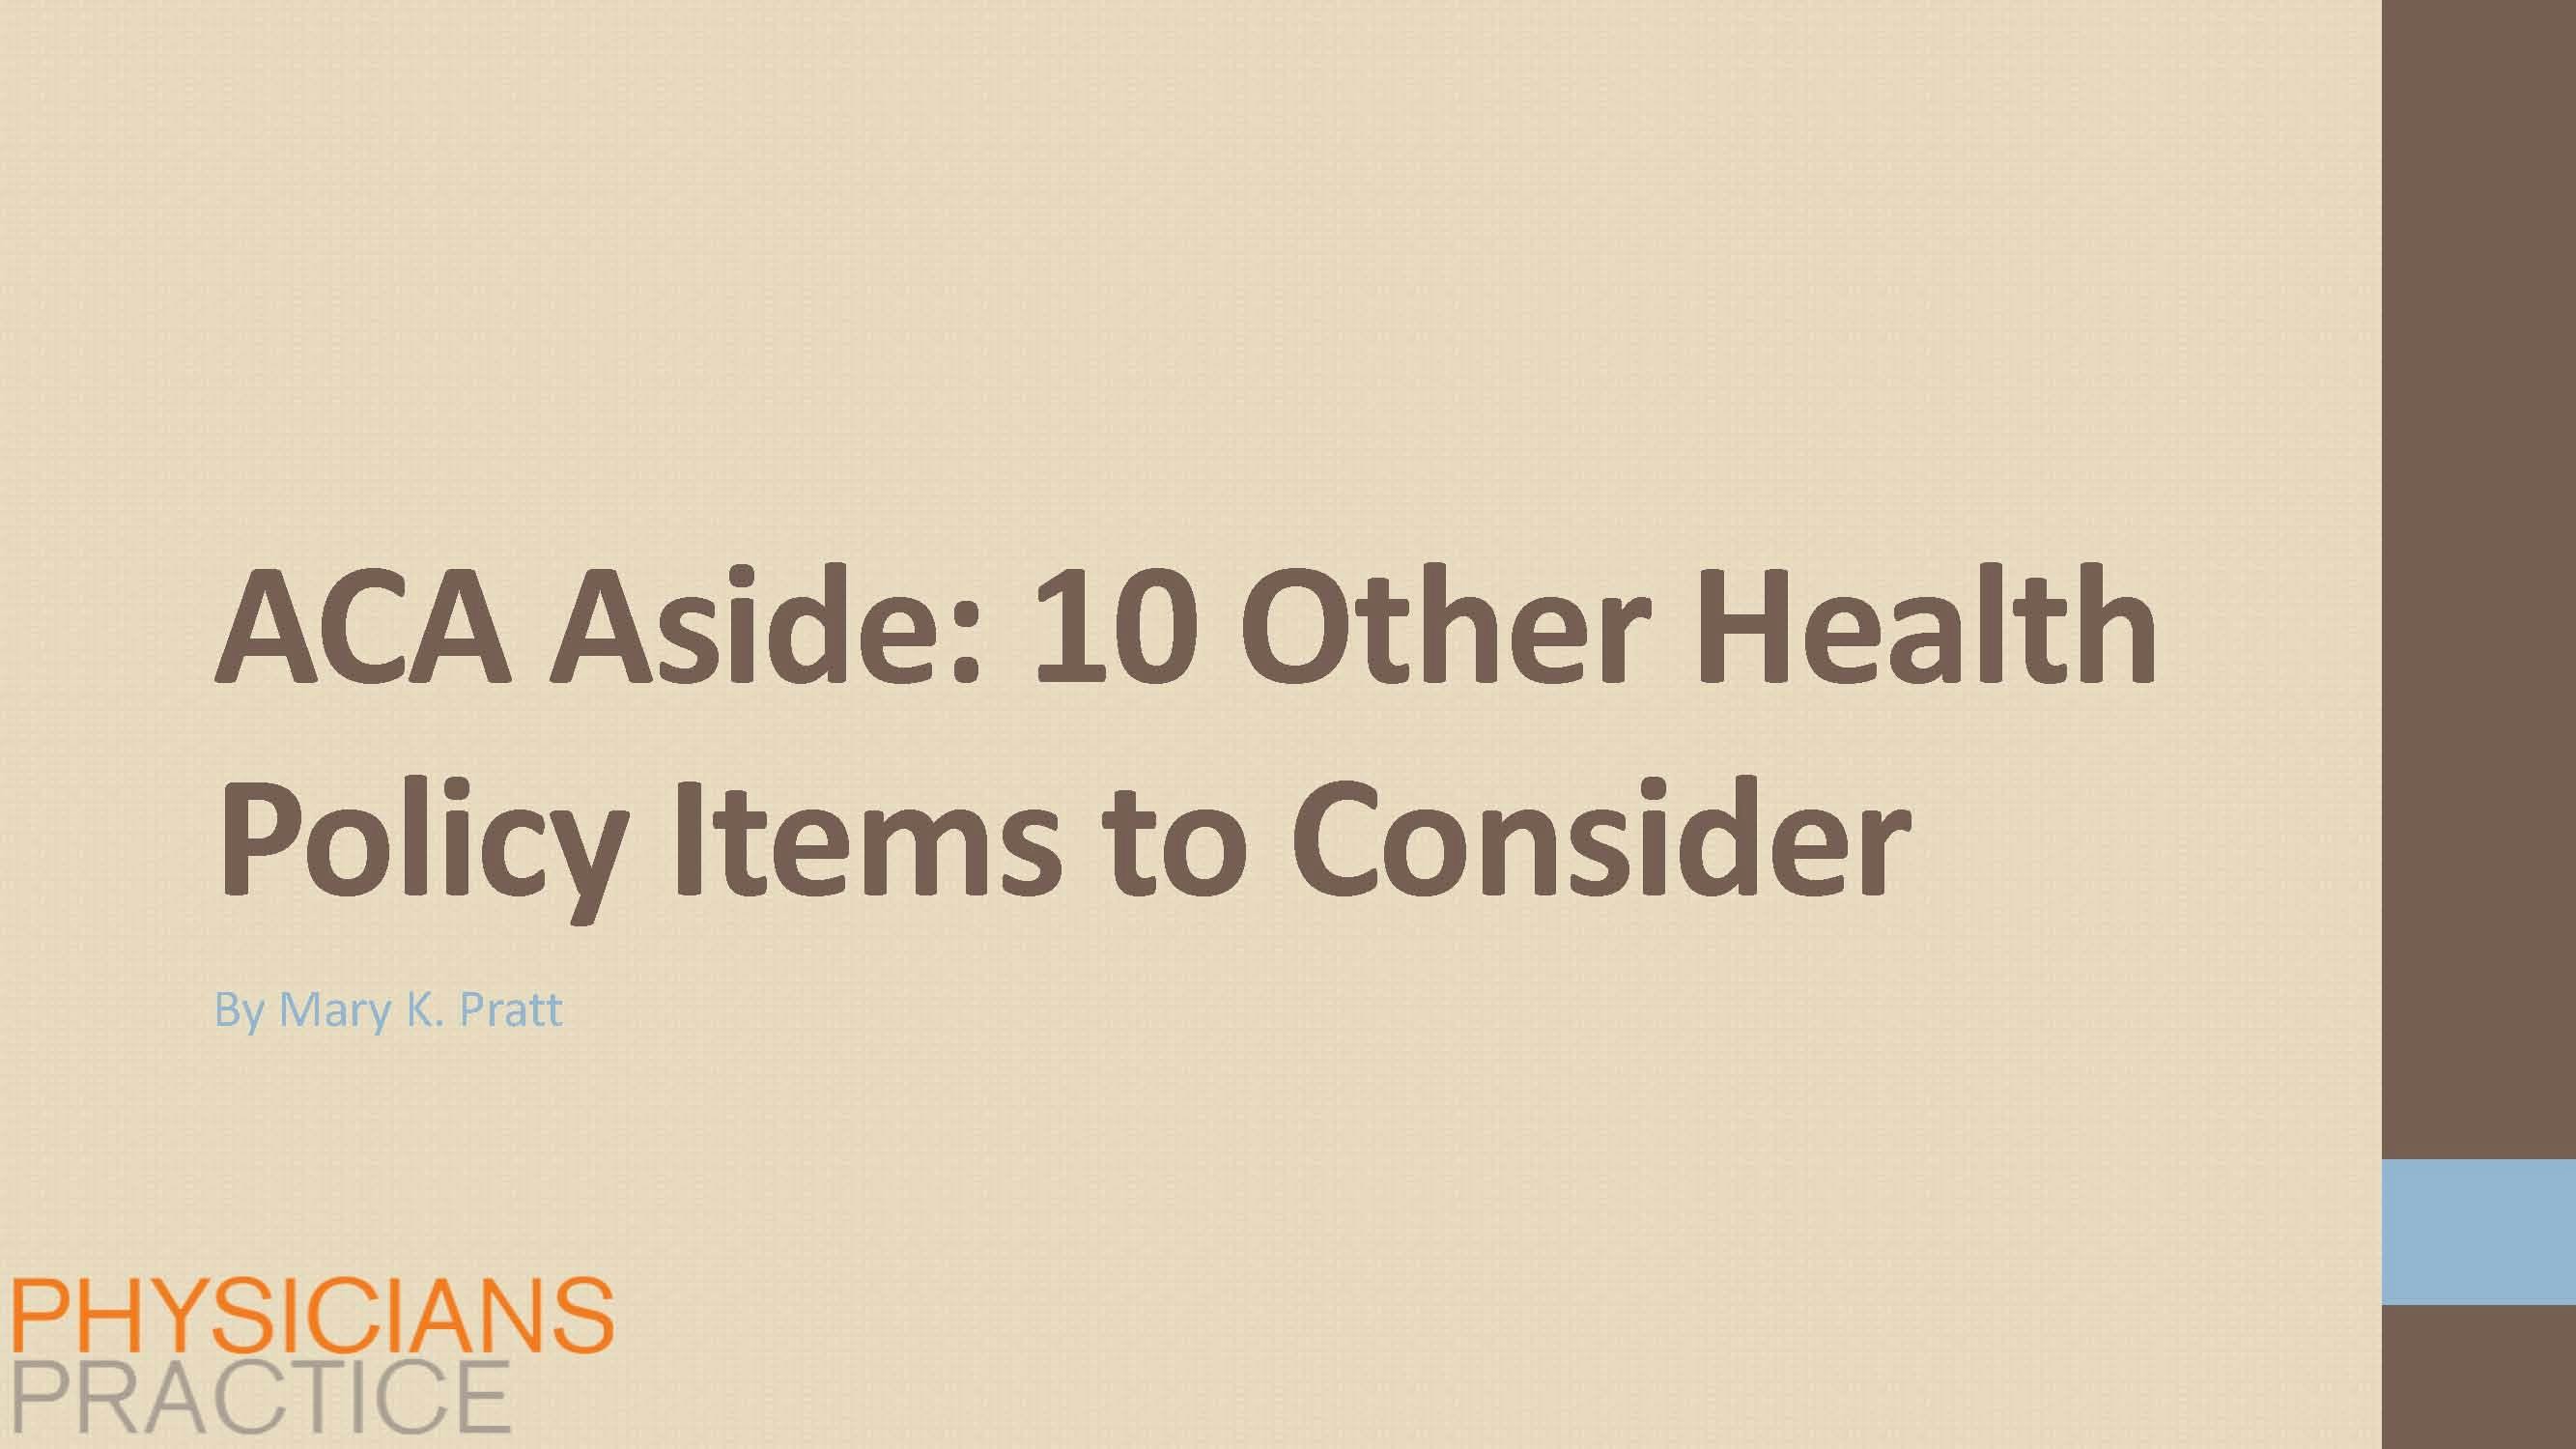 ACA Aside: 10 Other Health Policy Items to Consider